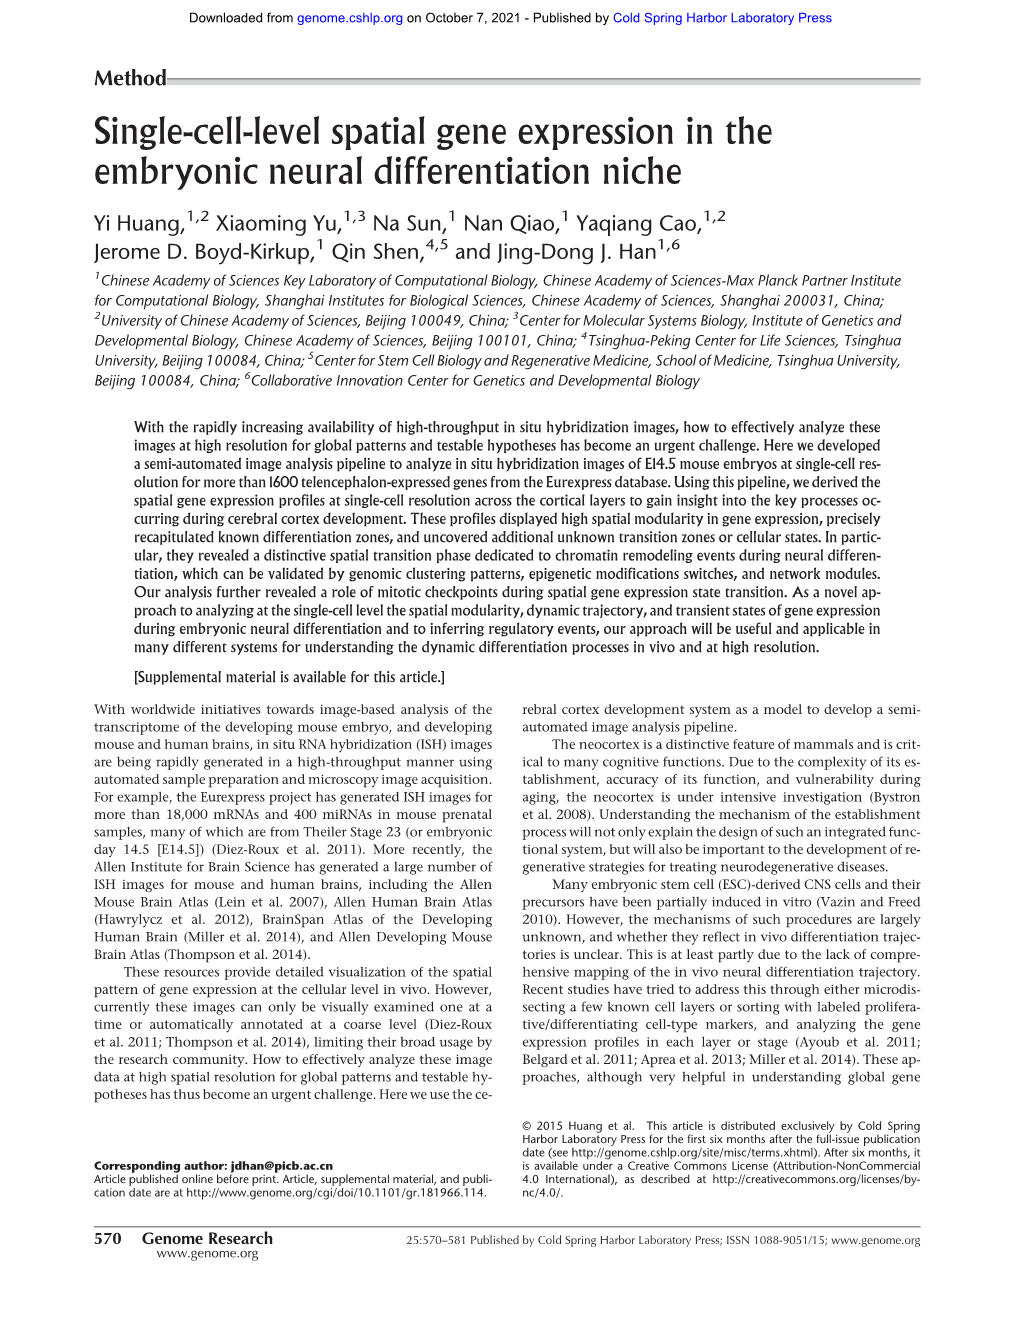 Single-Cell-Level Spatial Gene Expression in the Embryonic Neural Differentiation Niche